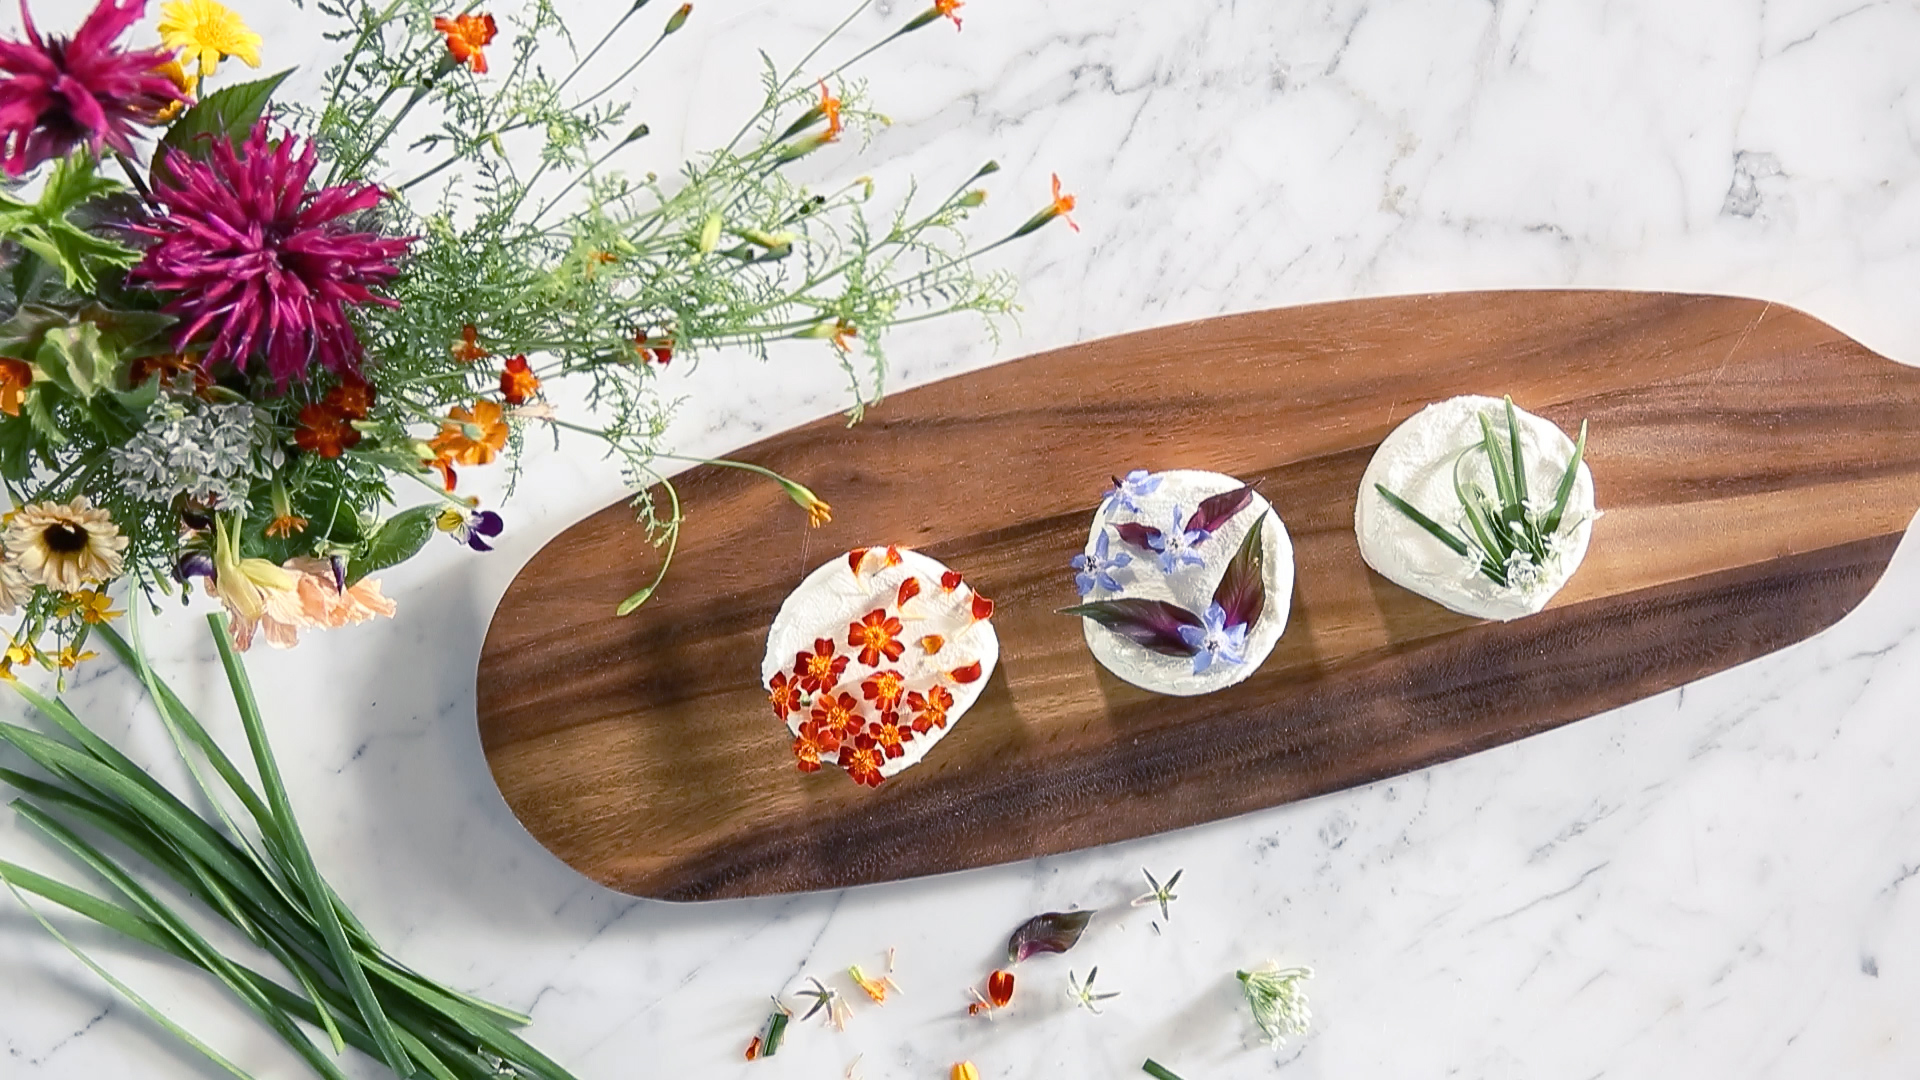 How to Make a Floral Cheese Plate